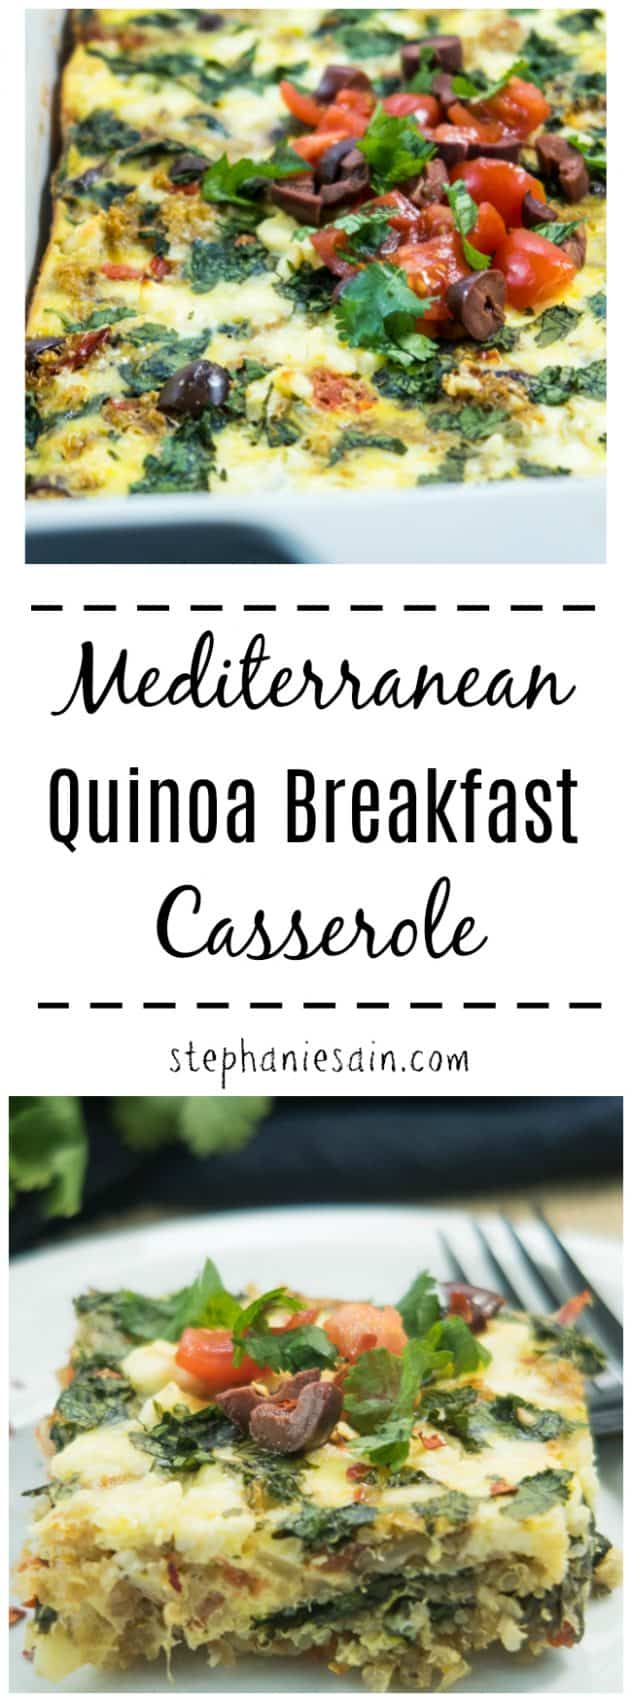 This Mediterranean Quinoa Breakfast Casserole is great for a special occasion brunch or even for an nice weekend breakfast. Loaded with tons of fresh veggies, olives, & feta cheese. Can be made ahead and reheated as needed. Gluten Free & Vegetarian.